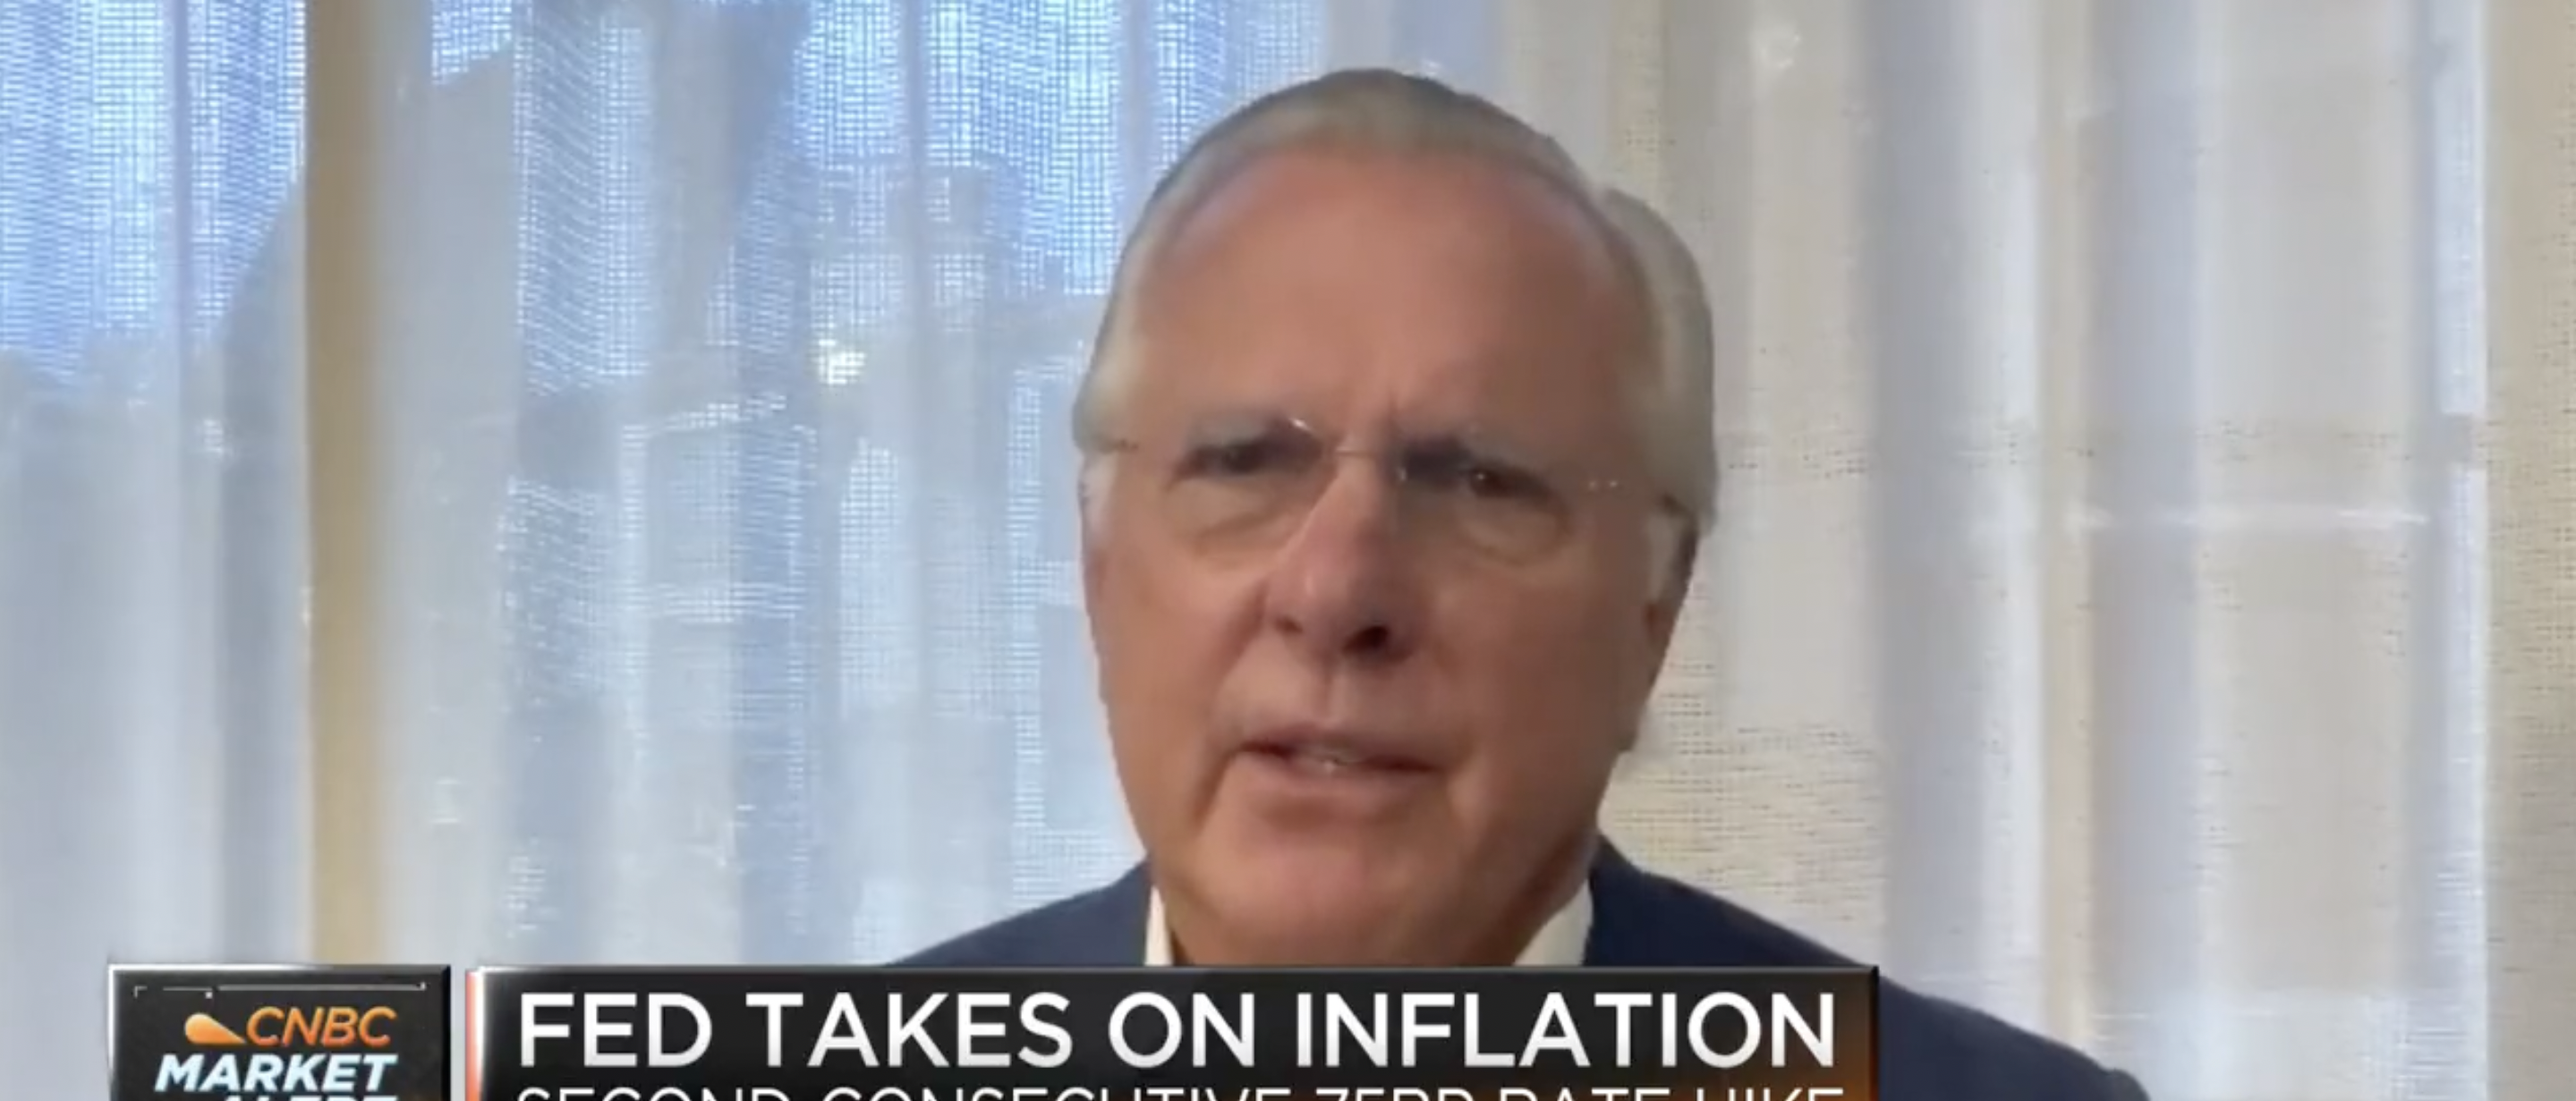 The Pelosis ‘Appear To Have Taken Advantage Of Inside Information,’ Says Former Fed Chair